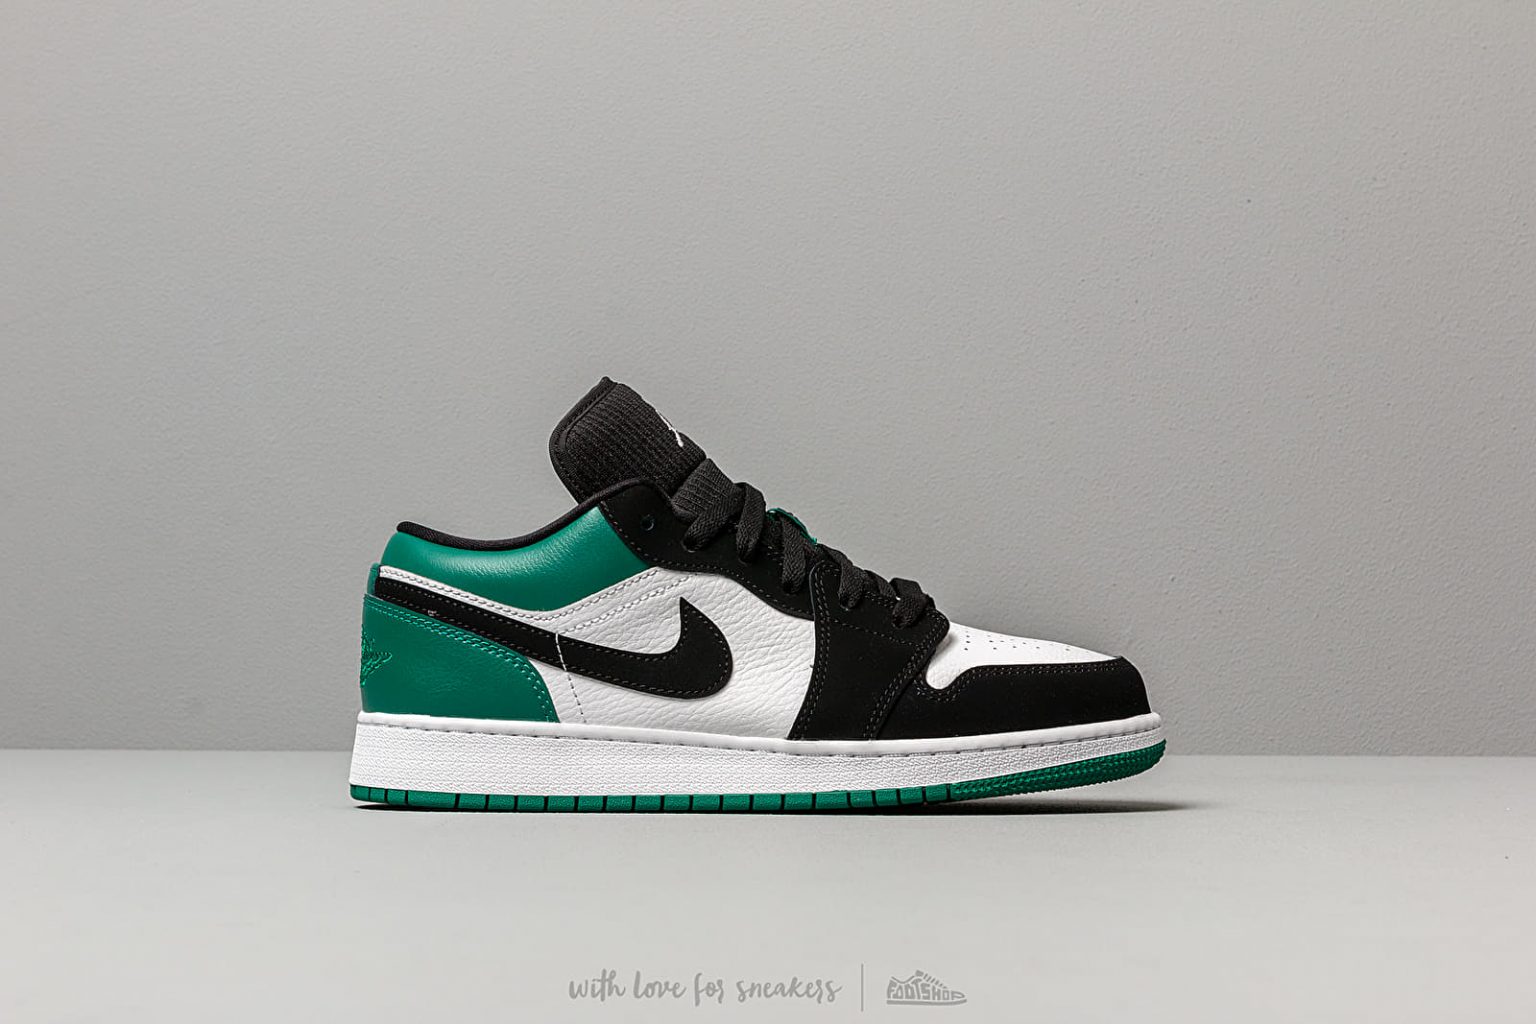 air jordan 1 low gs white black mystic green hyper pink 7a Quality Replicas are the first copy products such as copycats shoes, watches, clothing, bags, and electronics.